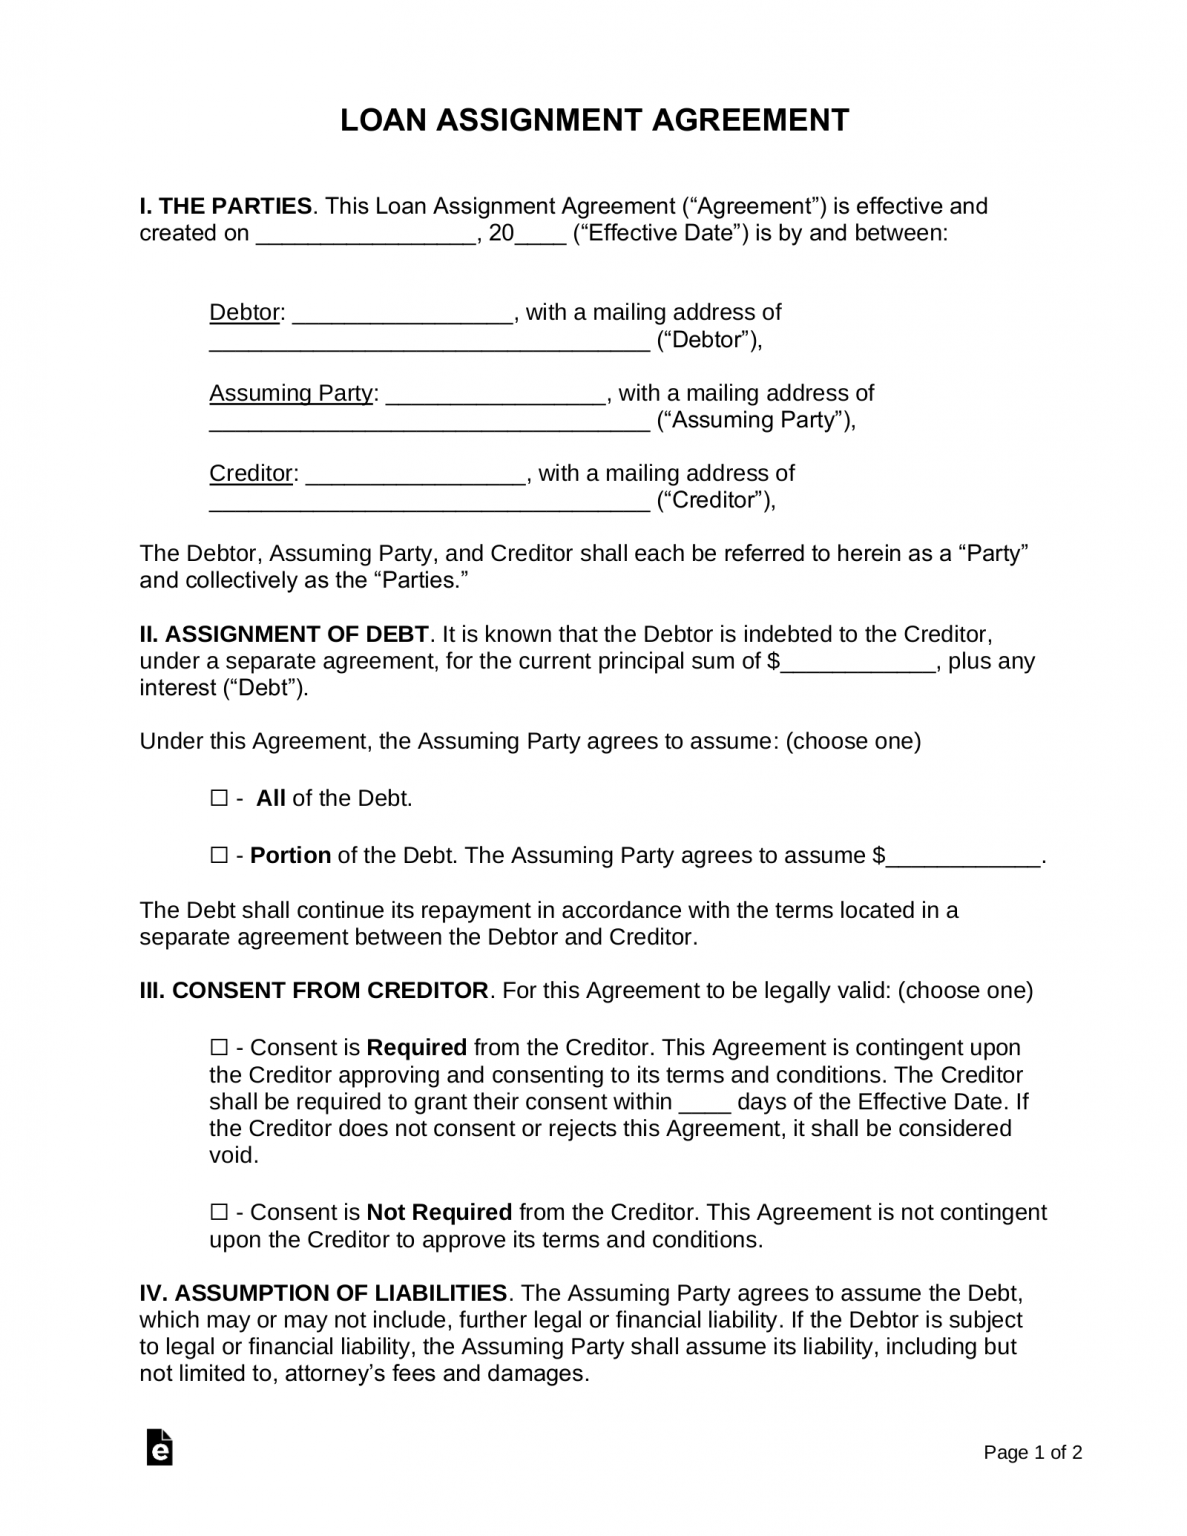 loan assignment document